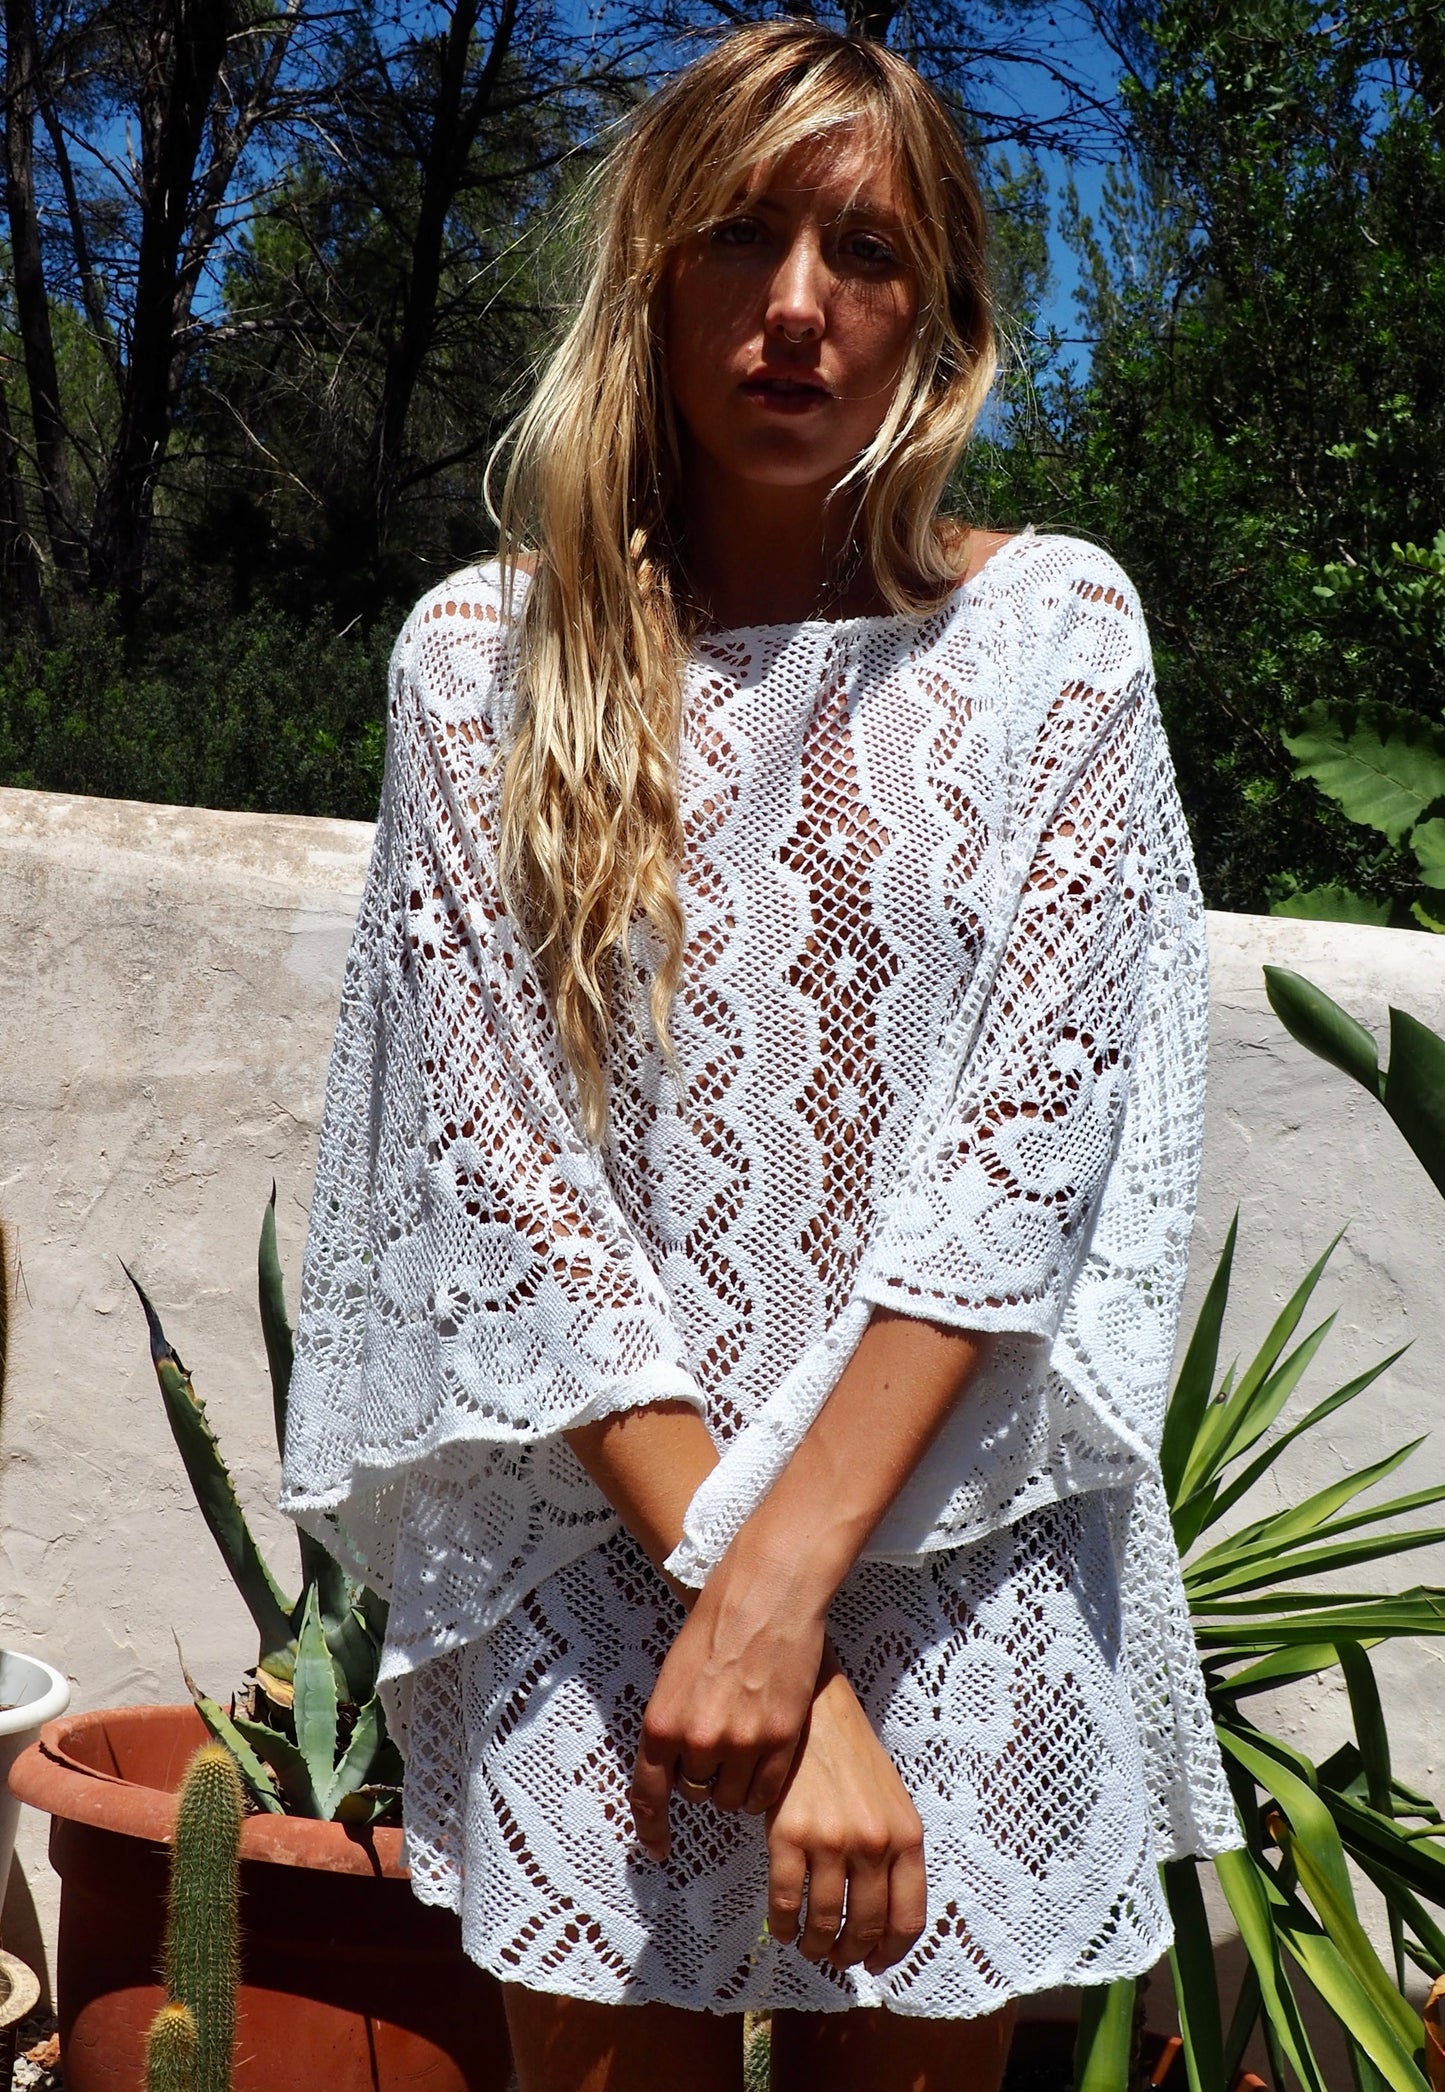 White vintage crochet bell sleeve shirt dress up-cycled by Vagabond Ibiza